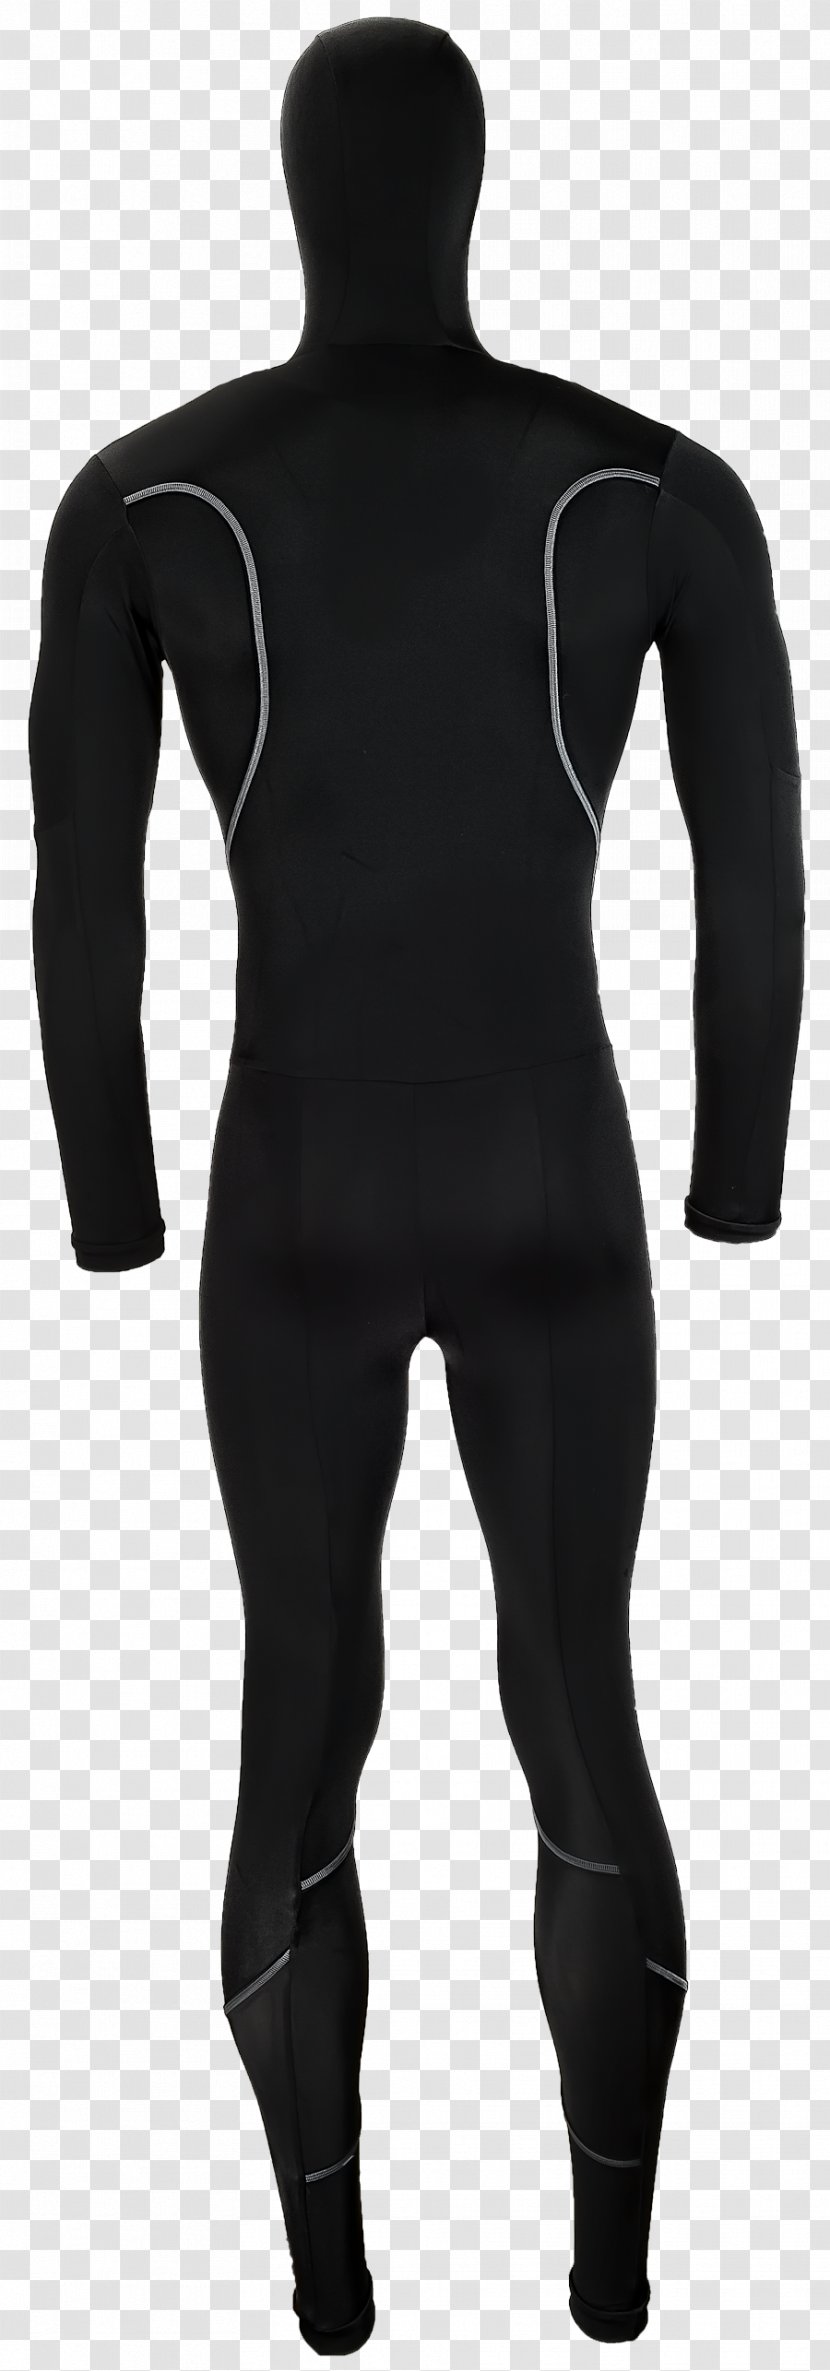 Wetsuit Hood Dry Suit Zipper Personal Protective Equipment - Lining Transparent PNG